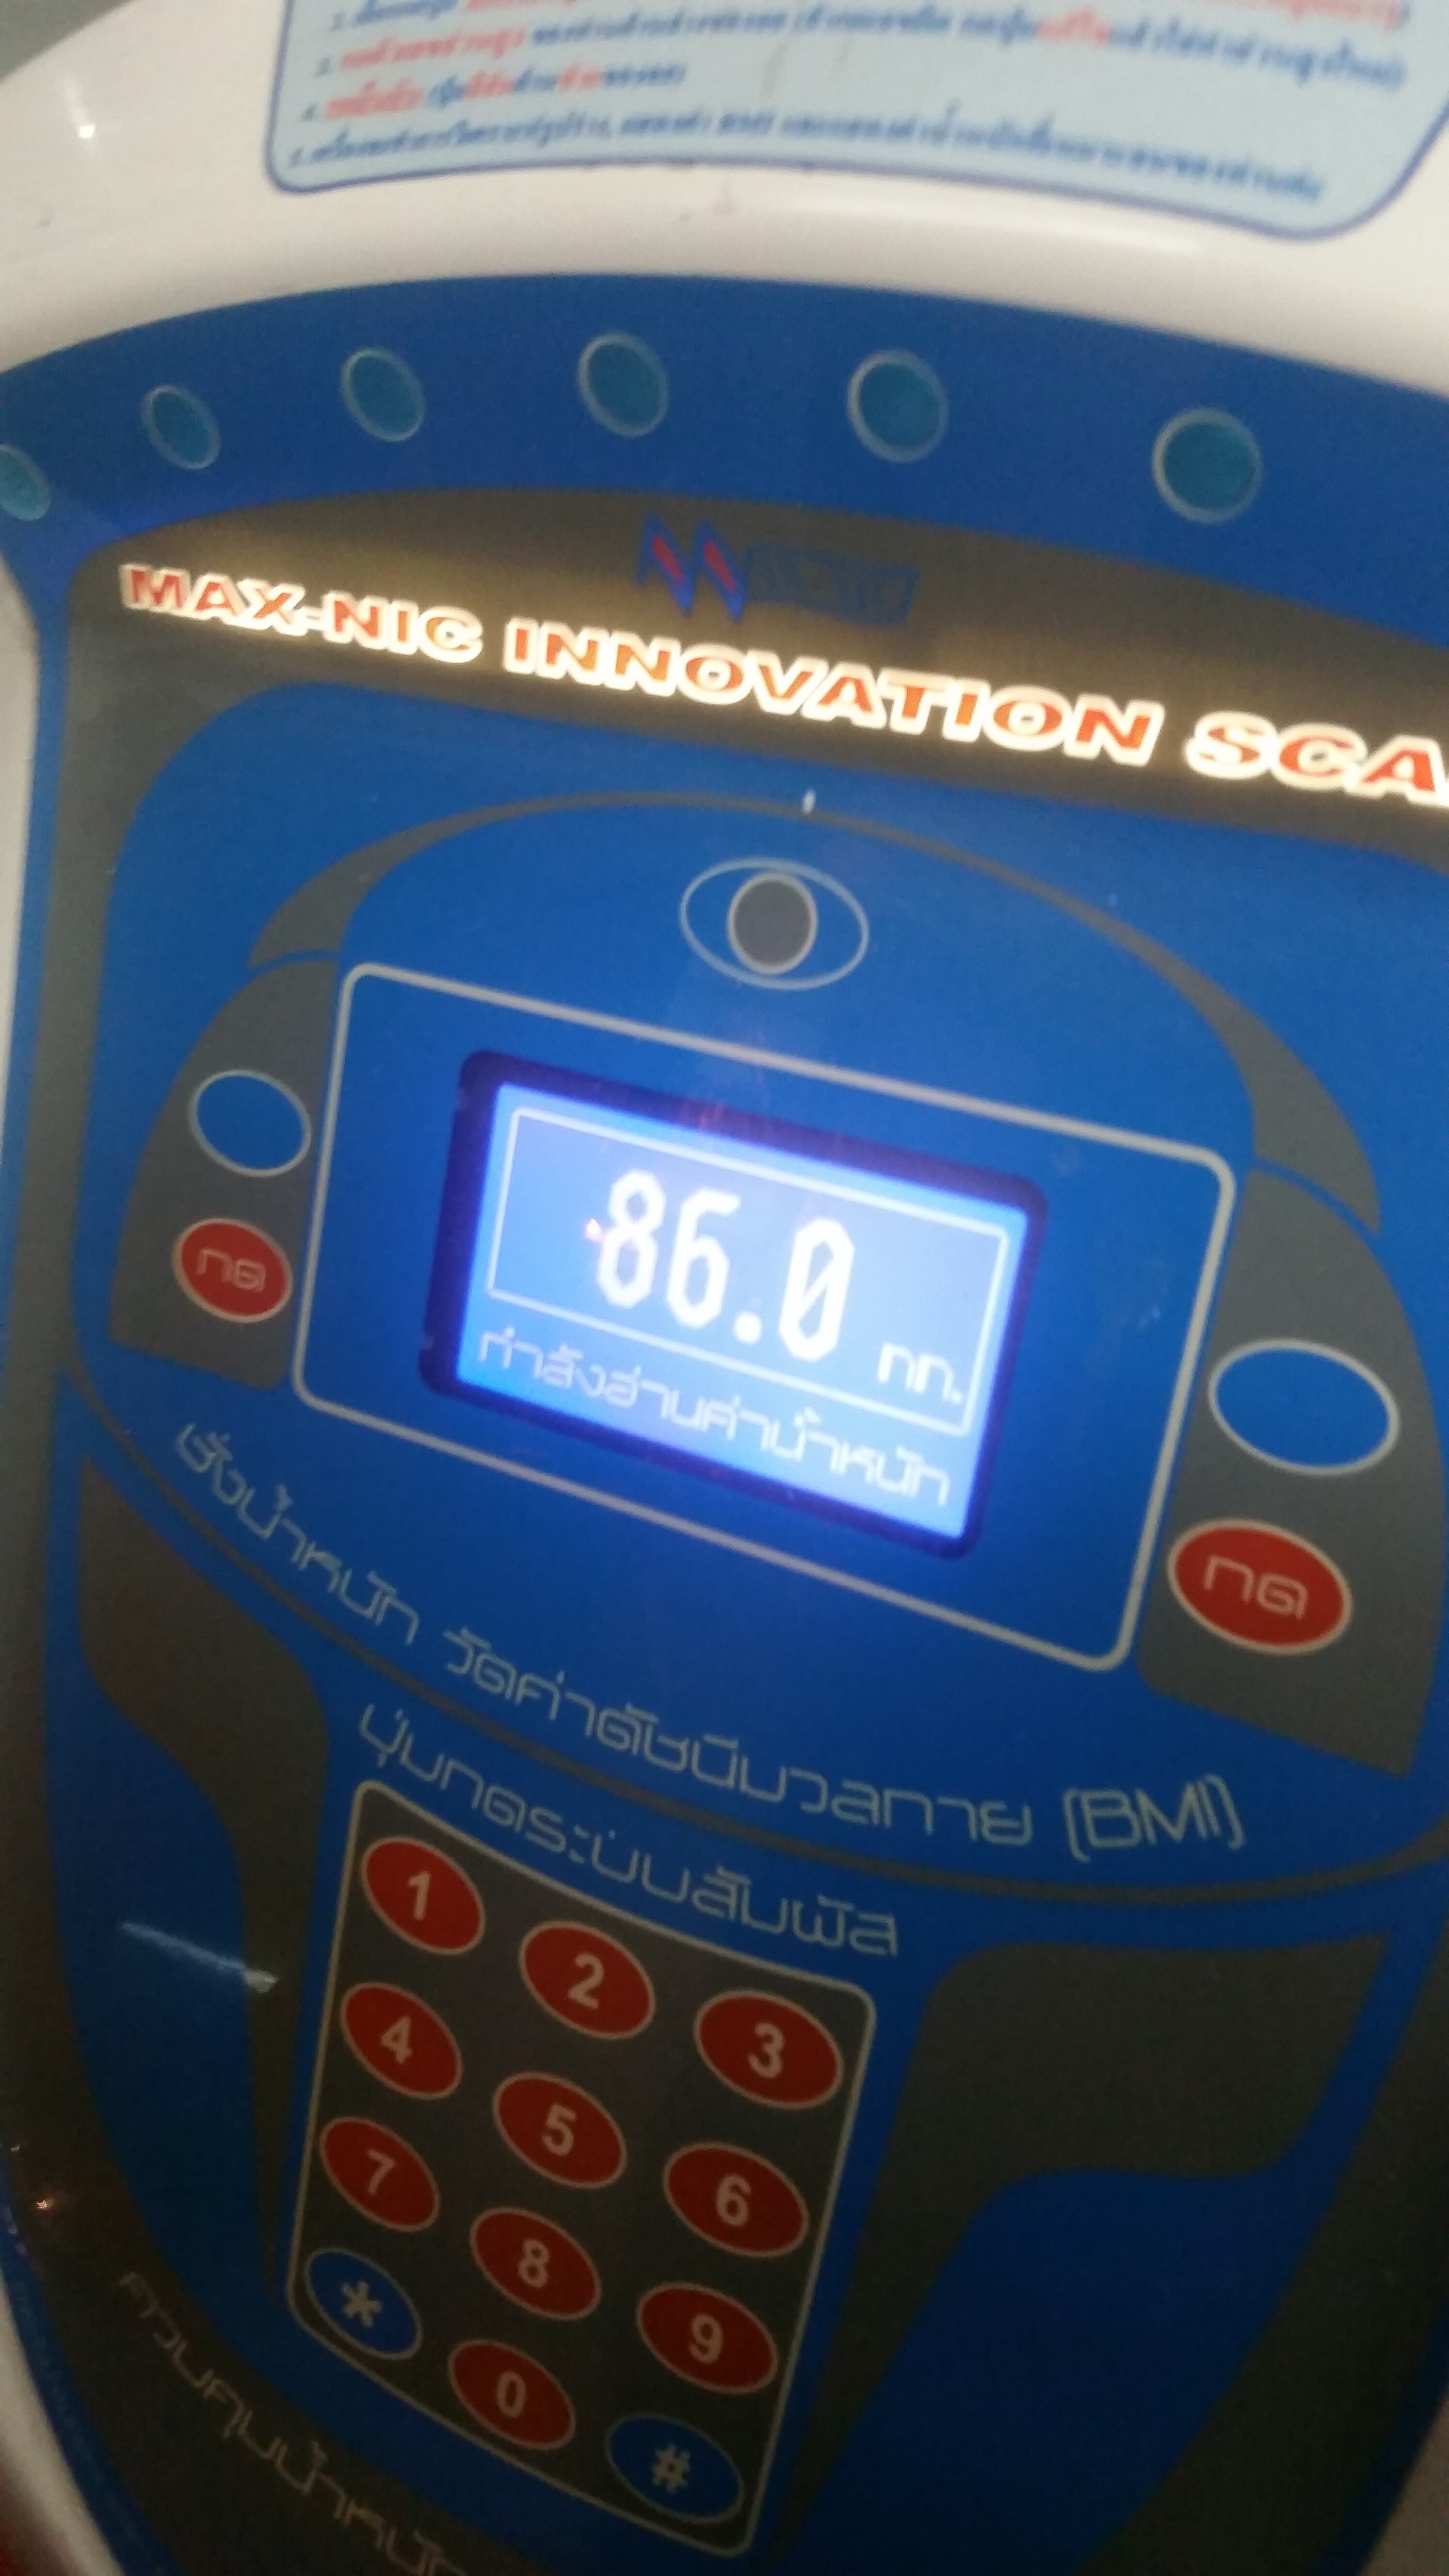 New weight record! 86kg.